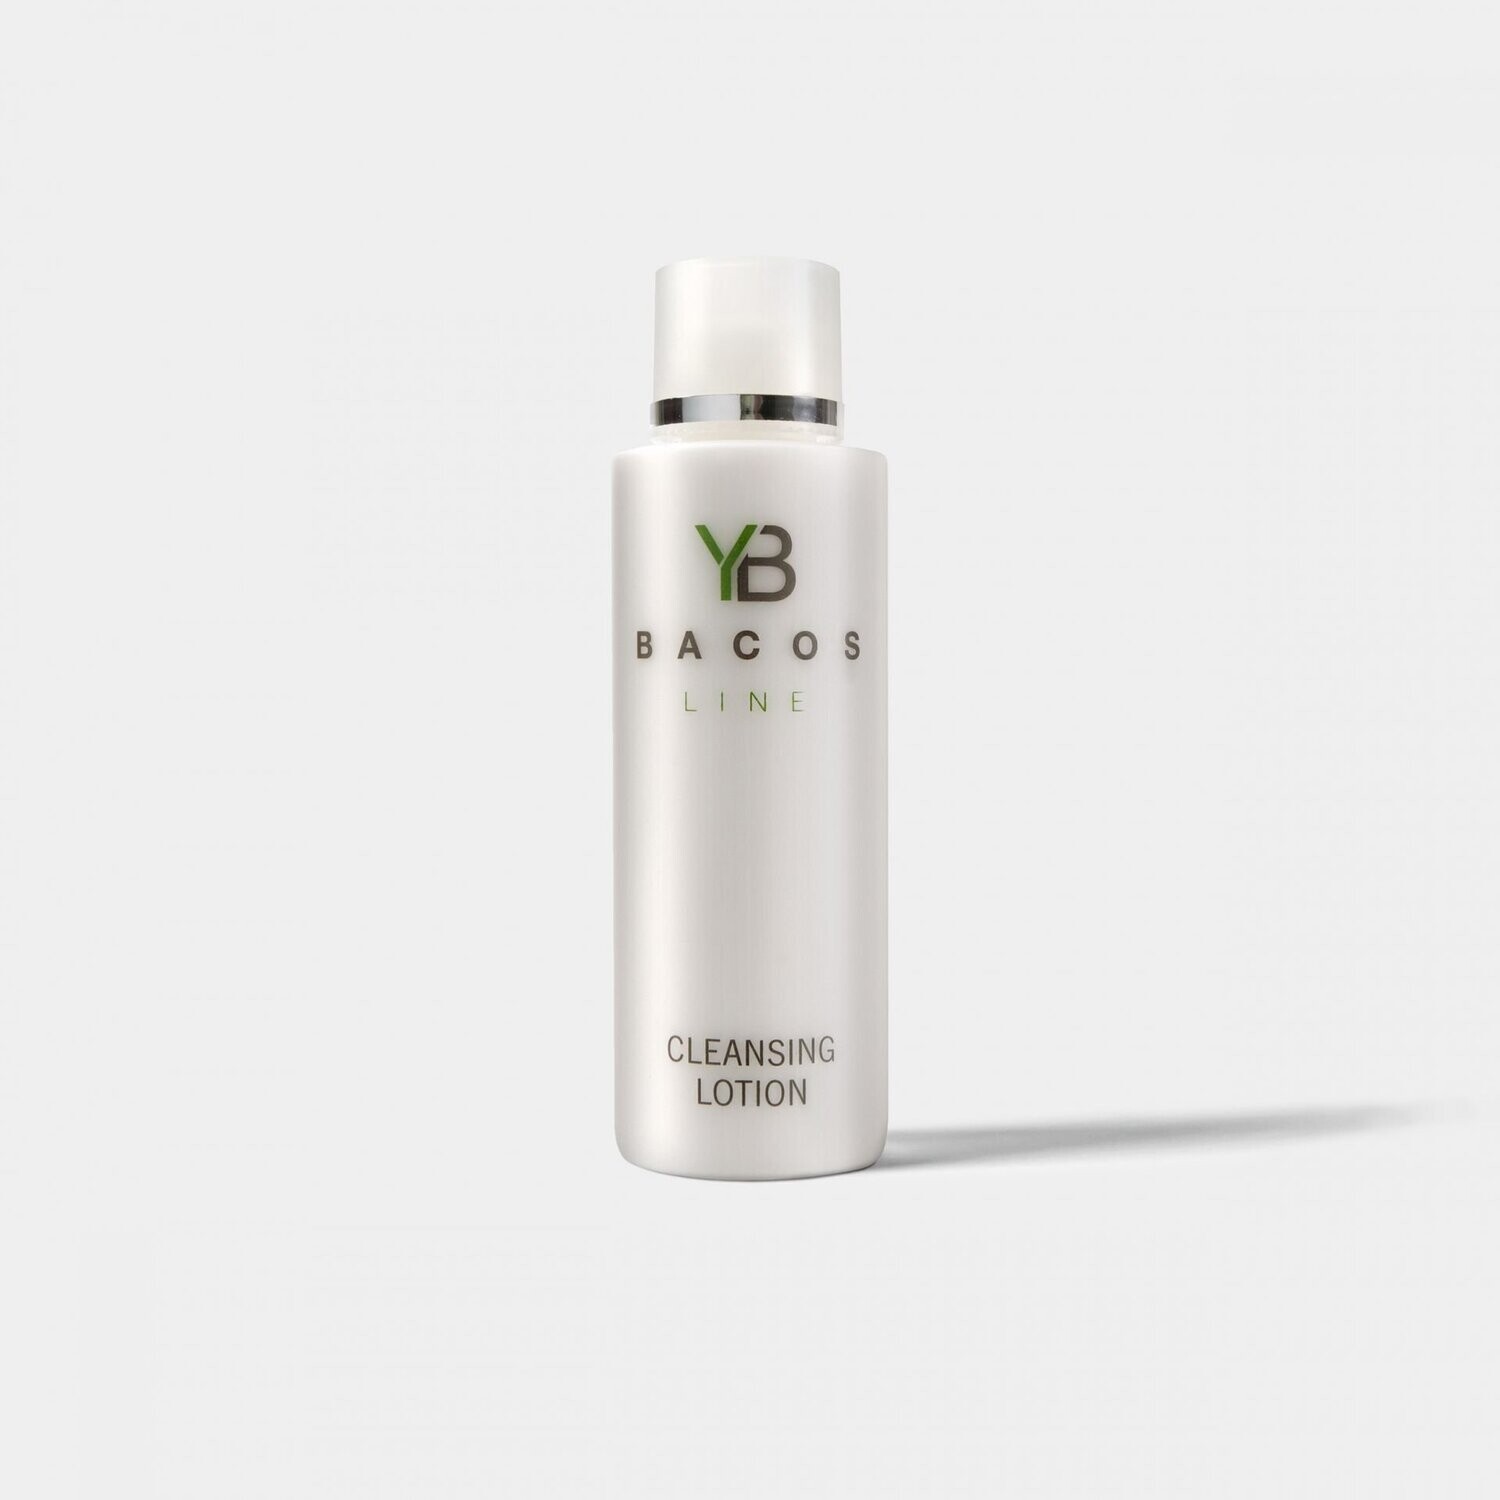 YB BACOS LINE CLEANSING LOTION - 200 ml